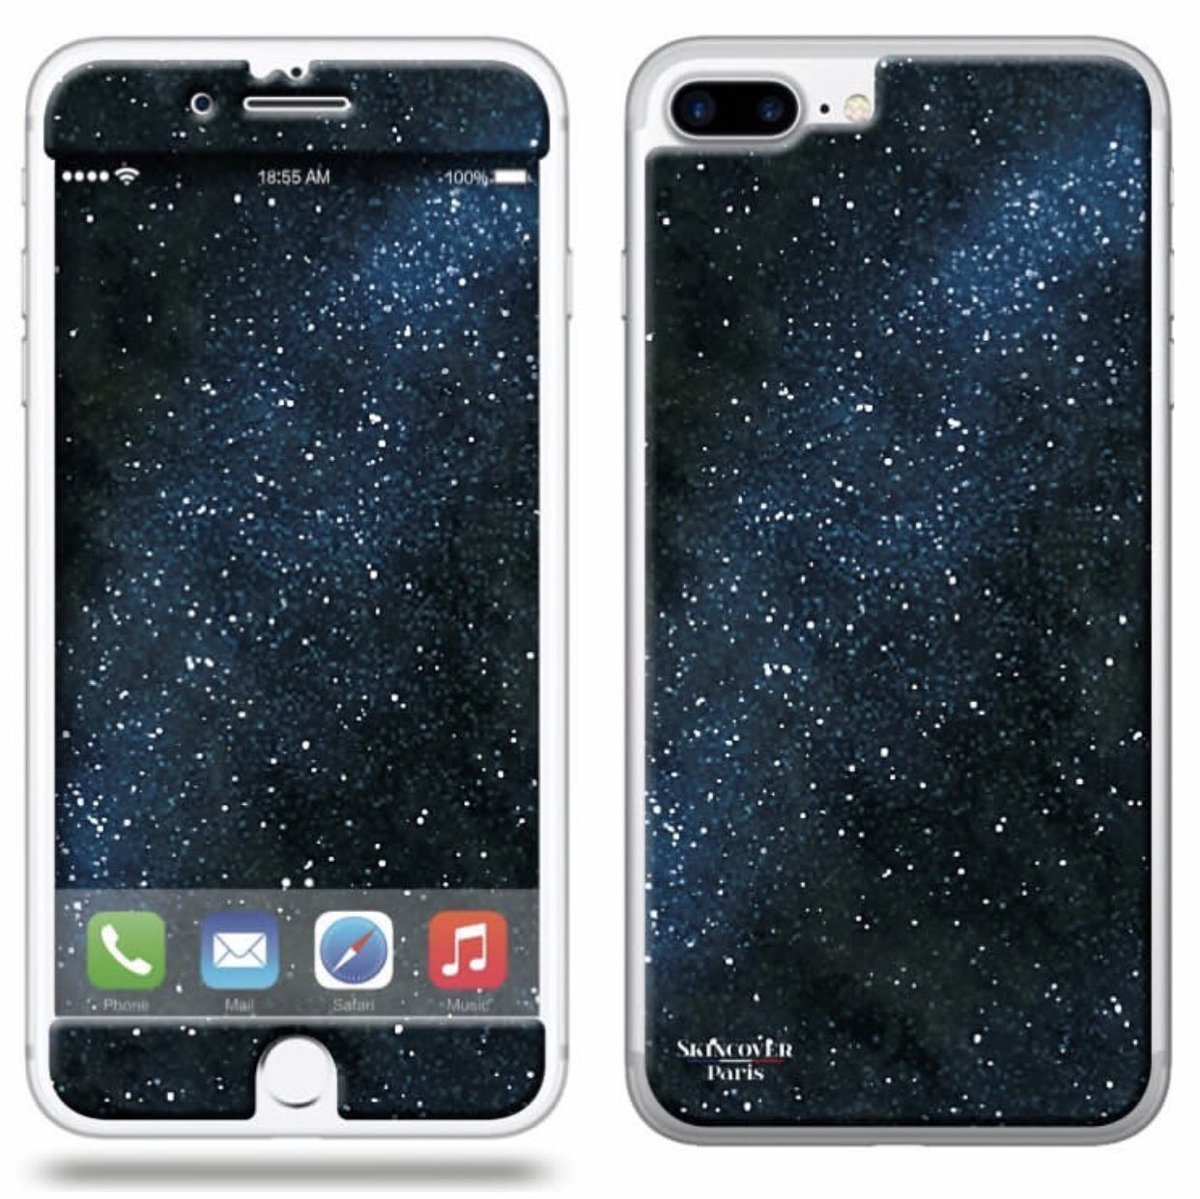 IPhone 8 Plus Milky Way By Skincover Since 2011 Skincover Paris High Fashion For High Technology 👍🎨🇫🇷📸😉❤️#milkyway #paris #pfw #voielactée #voielactee #stickeriphone #iphoneskin #iphoneskins #skincover #skincoverParis